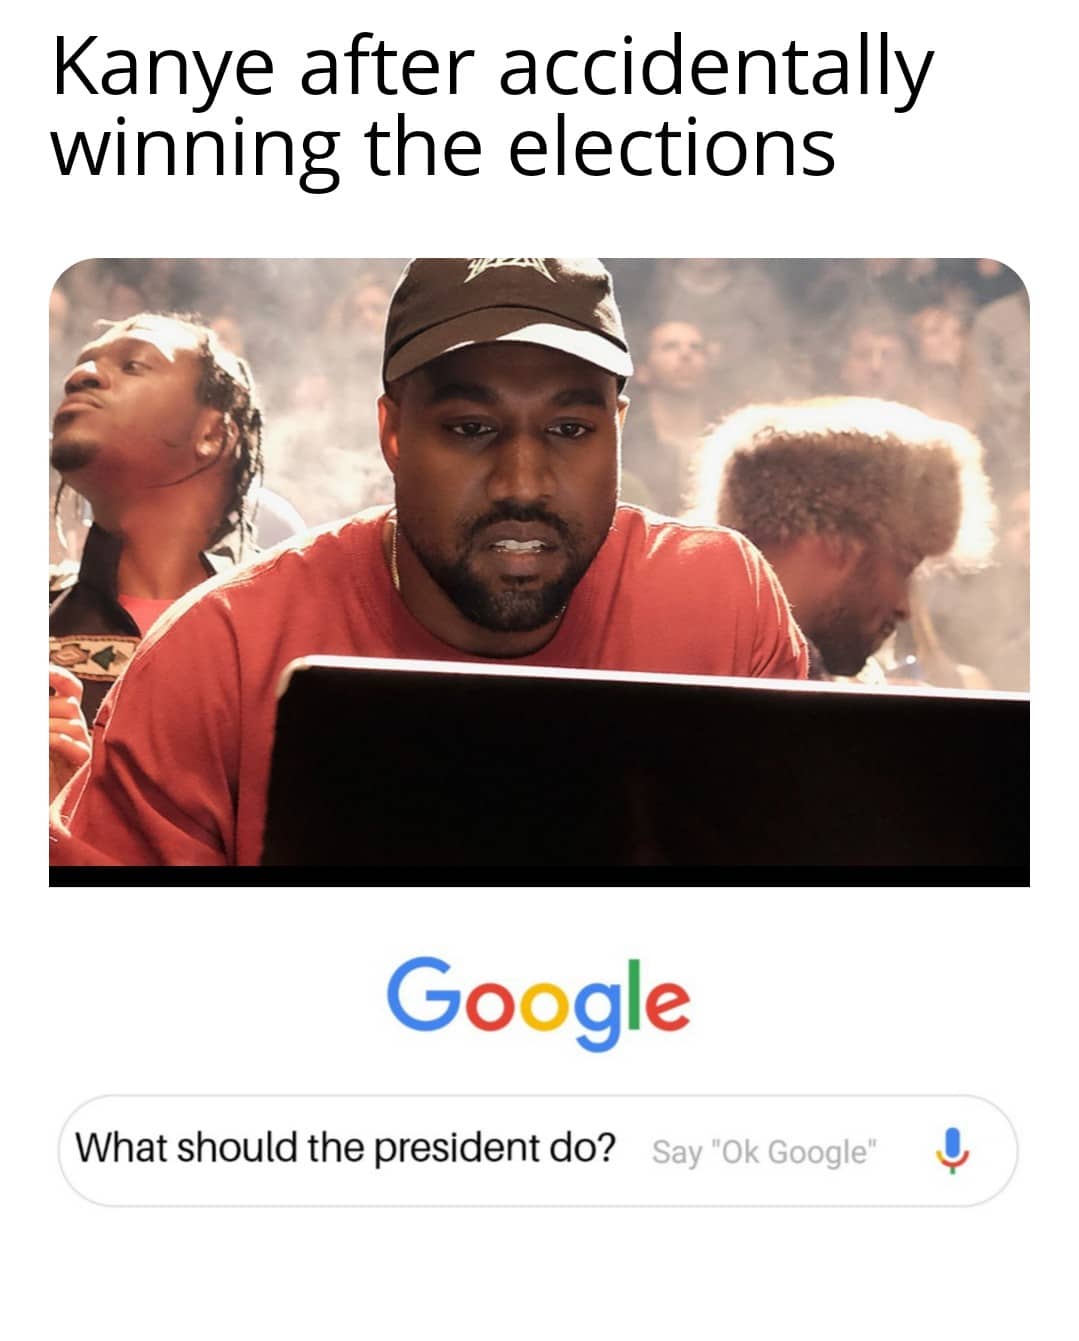 Dank, Kanye, Trump, America, Saitama, President Dank Memes Dank, Kanye, Trump, America, Saitama, President text: Kanye after accidentally winning the elections Google What should the president do? Say 